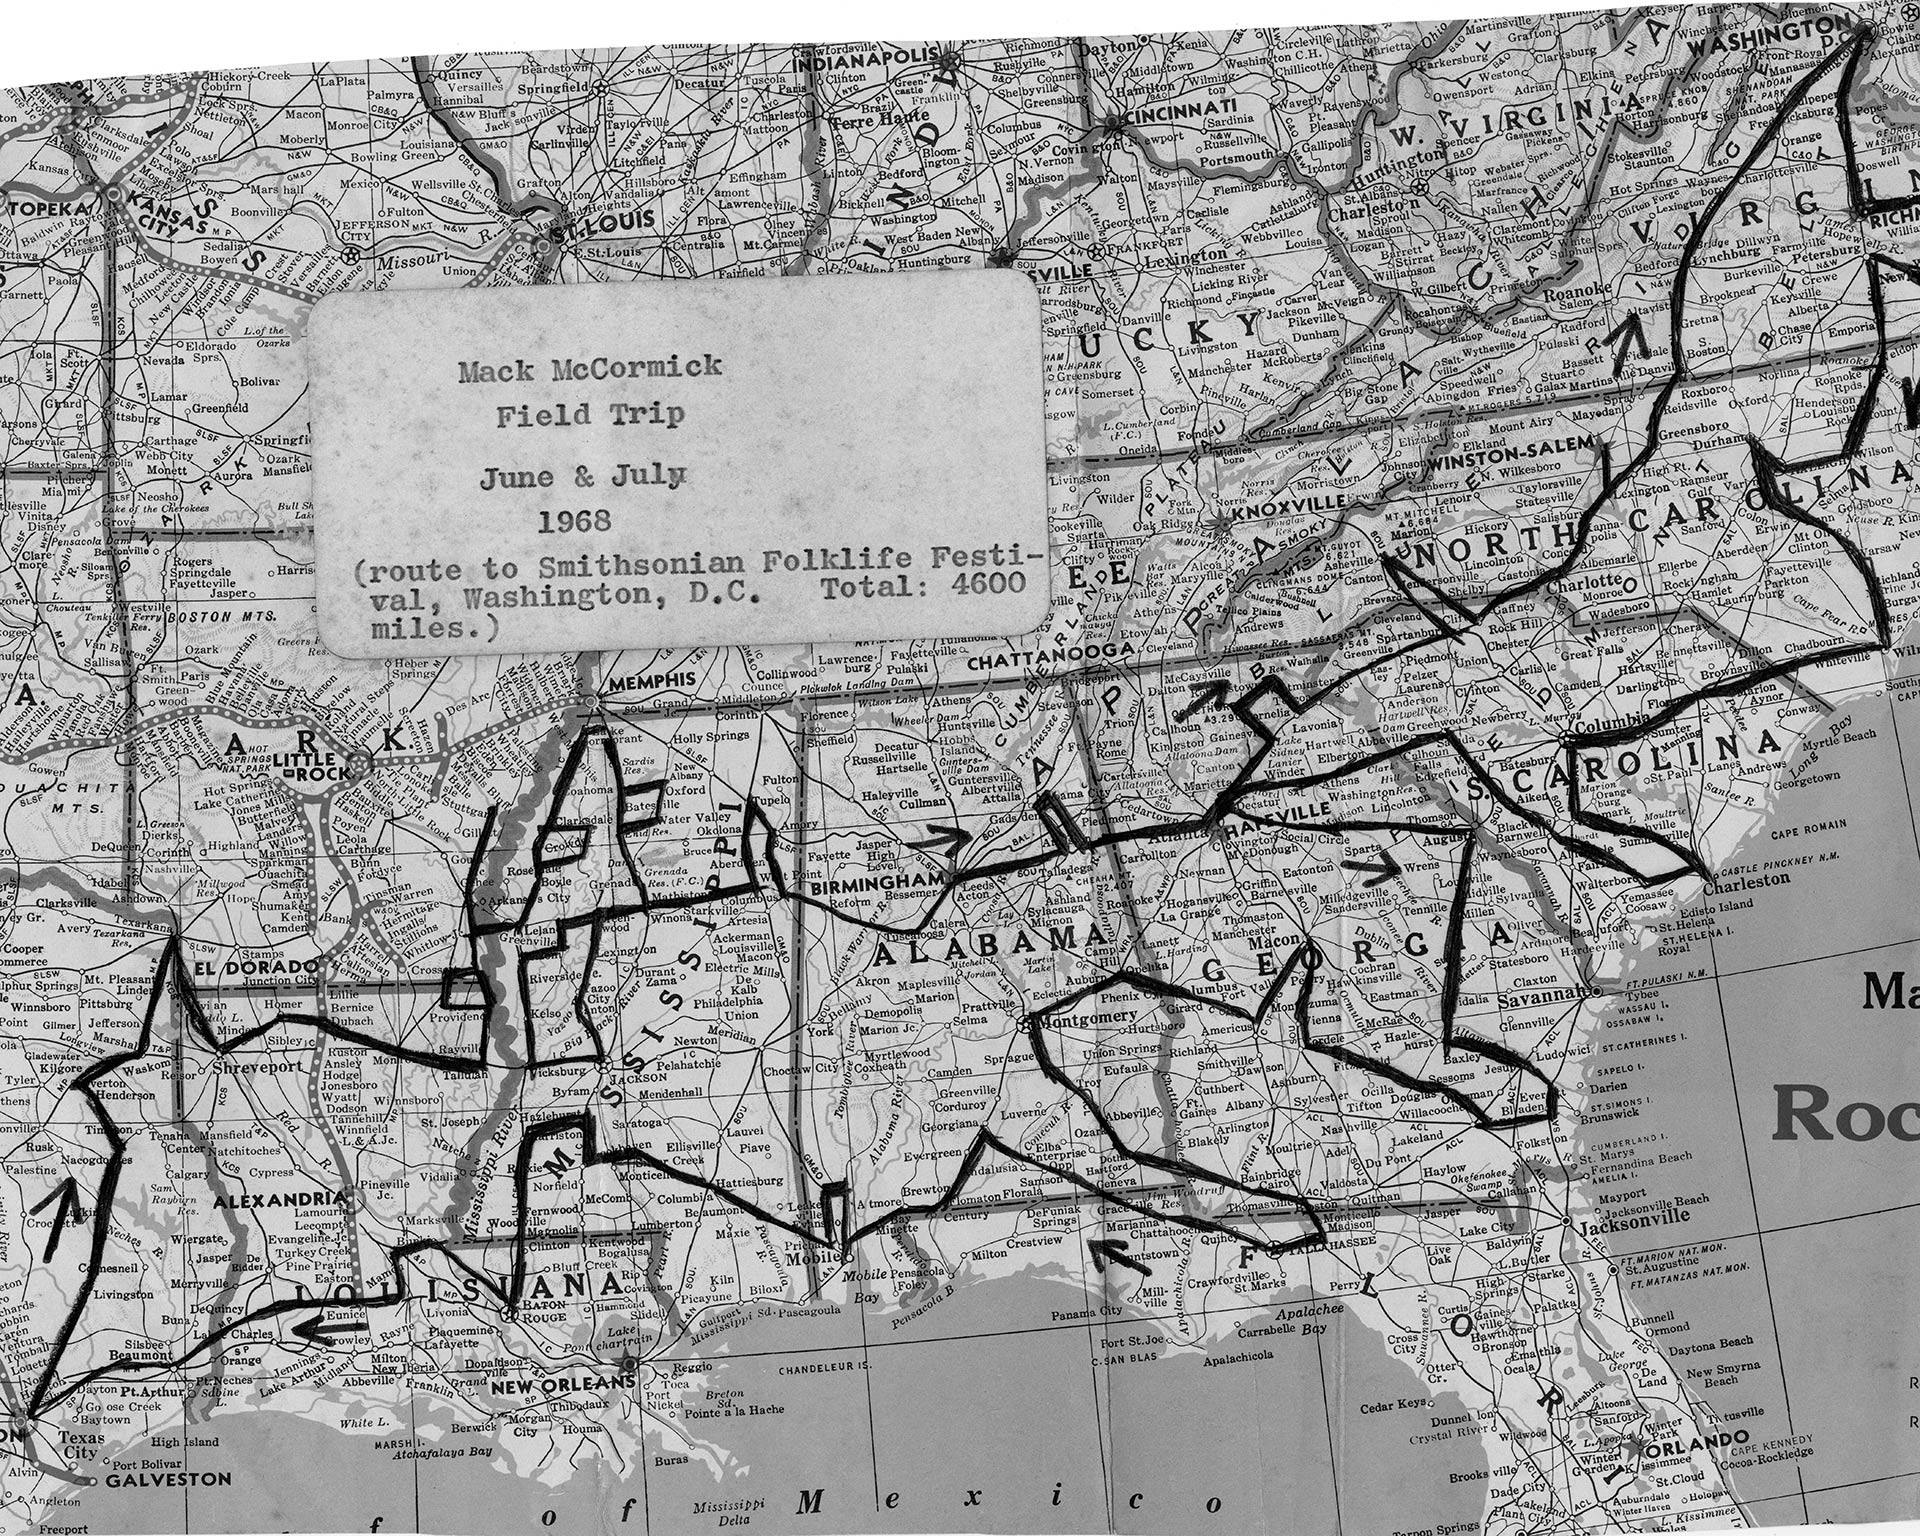 McCormick's map showing his 1968 field trip from Texas to Washington, D.C., and back, in search of clues about the life of Robert Johnson (courtesy of Susannah Nix from the Robert “Mack” McCormick Collection, Archives
Center, National Museum of American History)